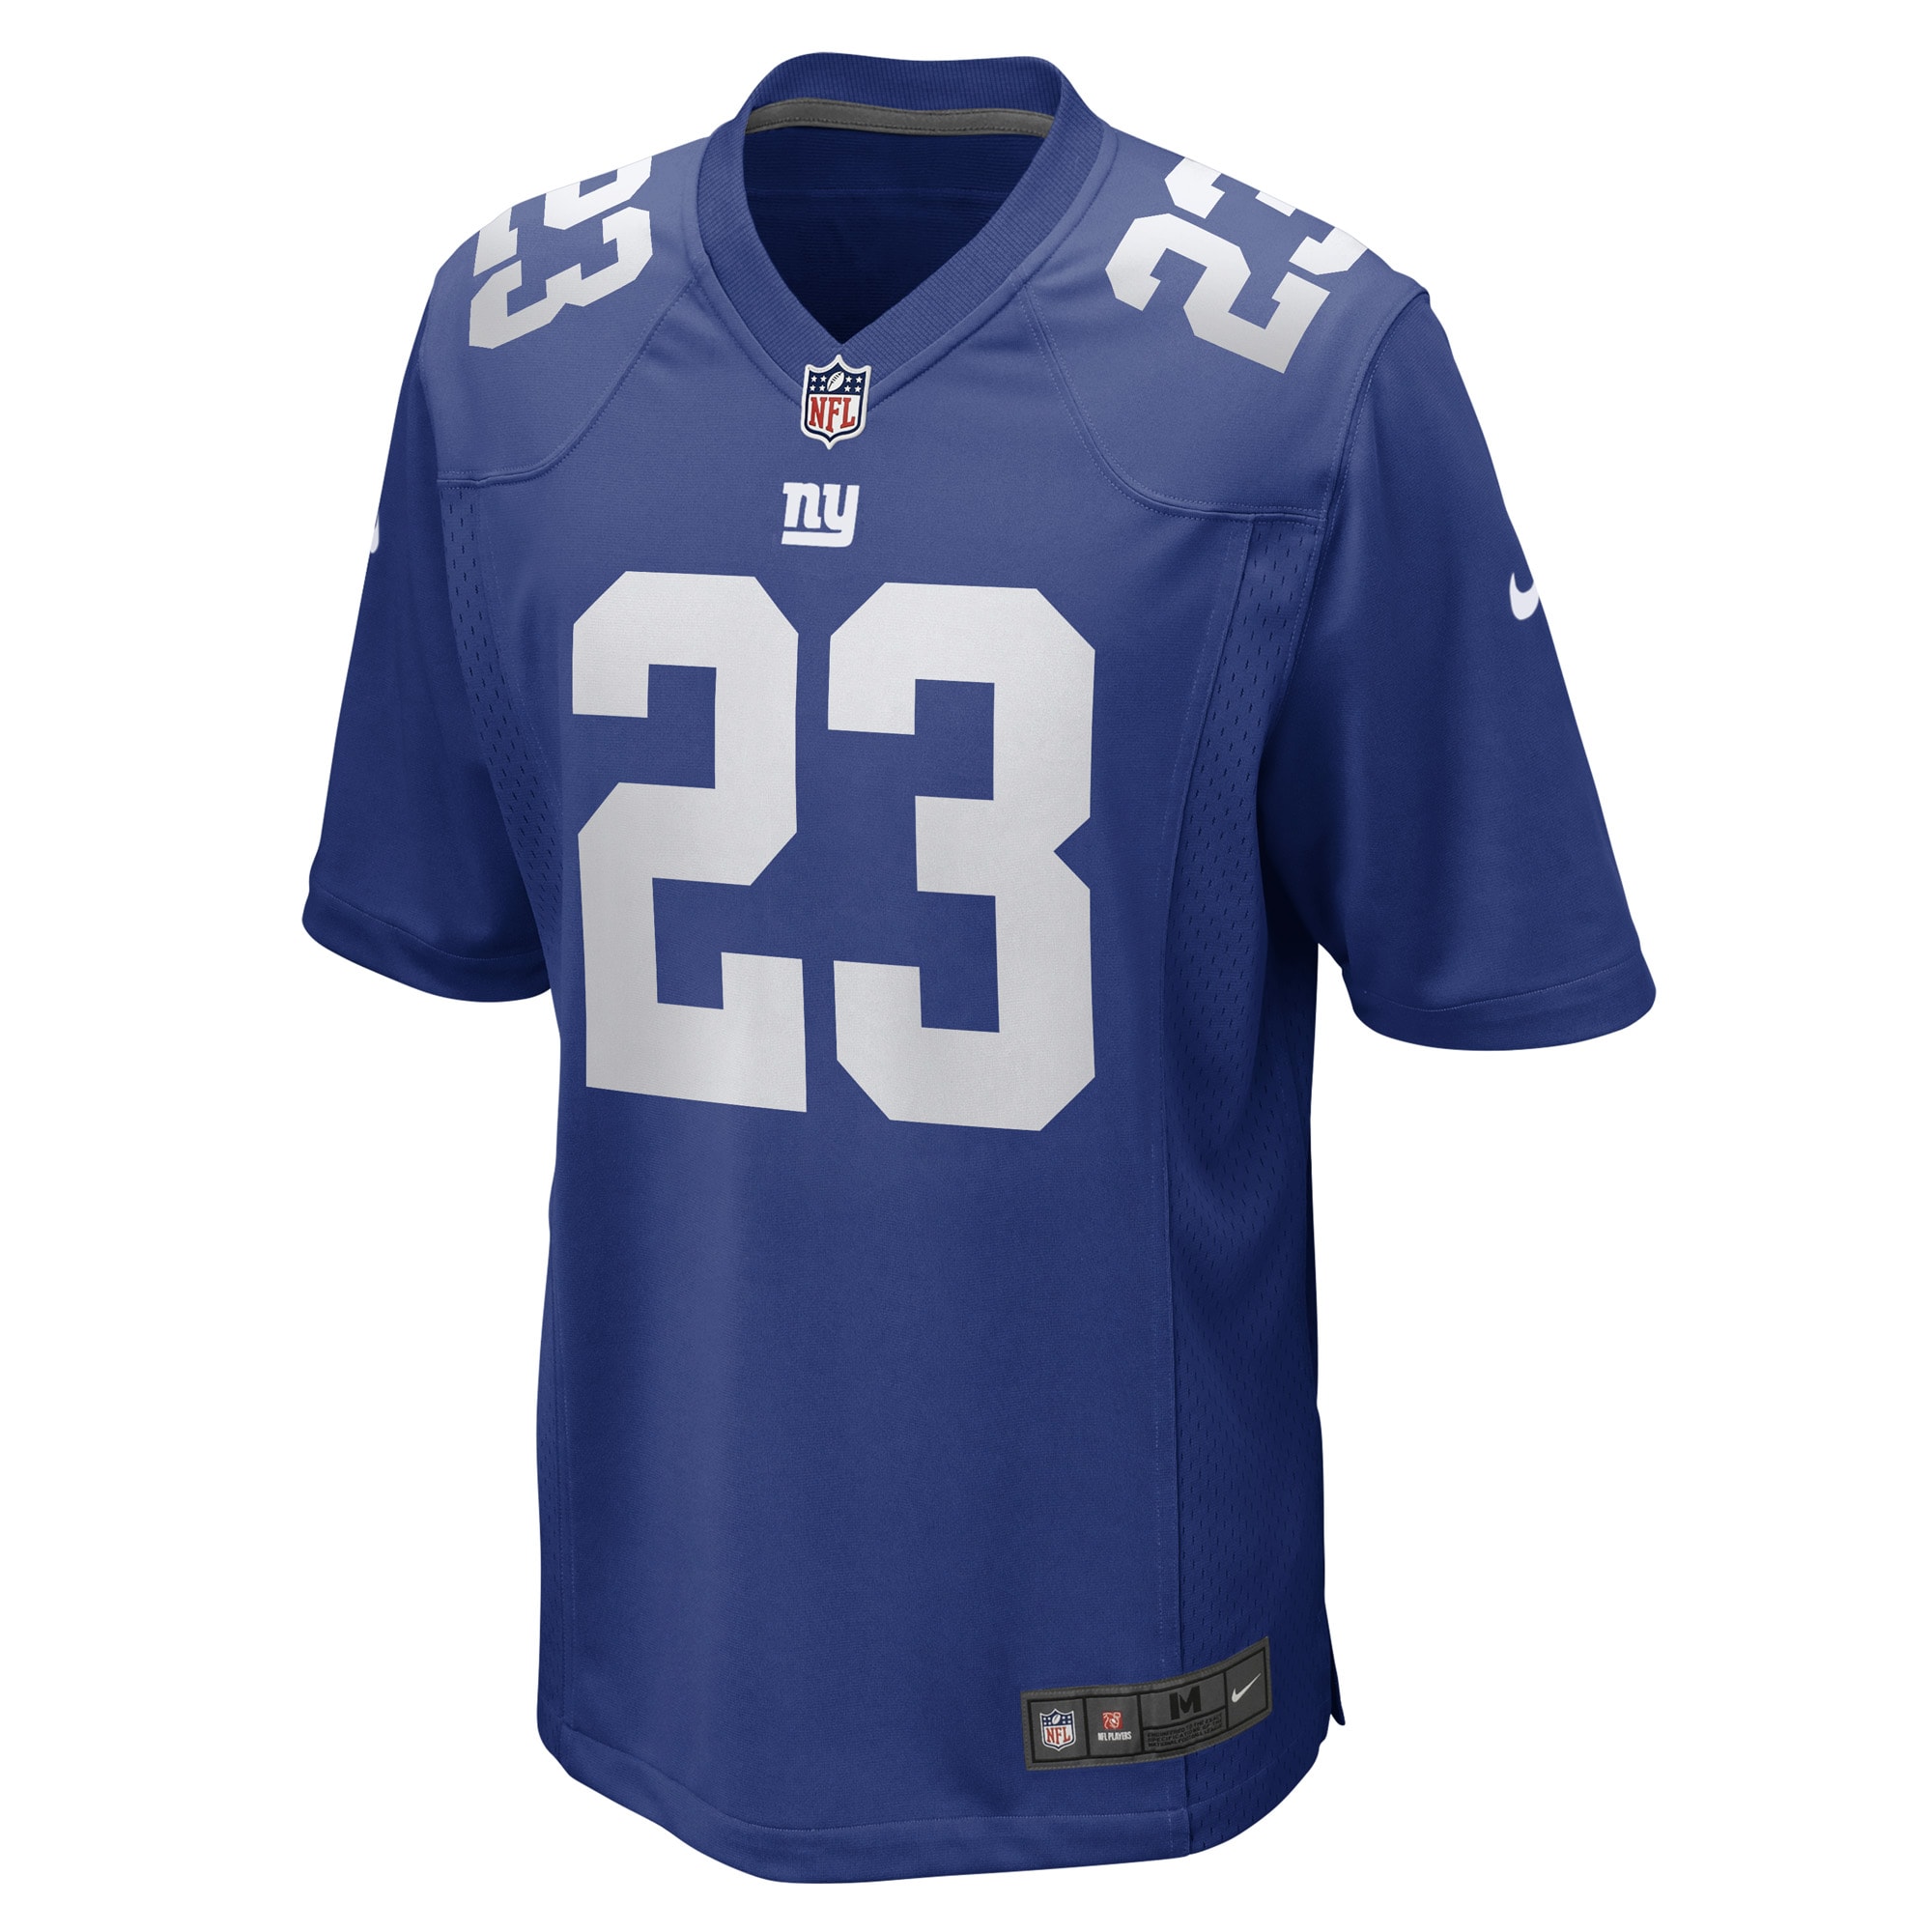 Men's New York Giants Jerseys Royal Gary Brightwell Team Game Player Style